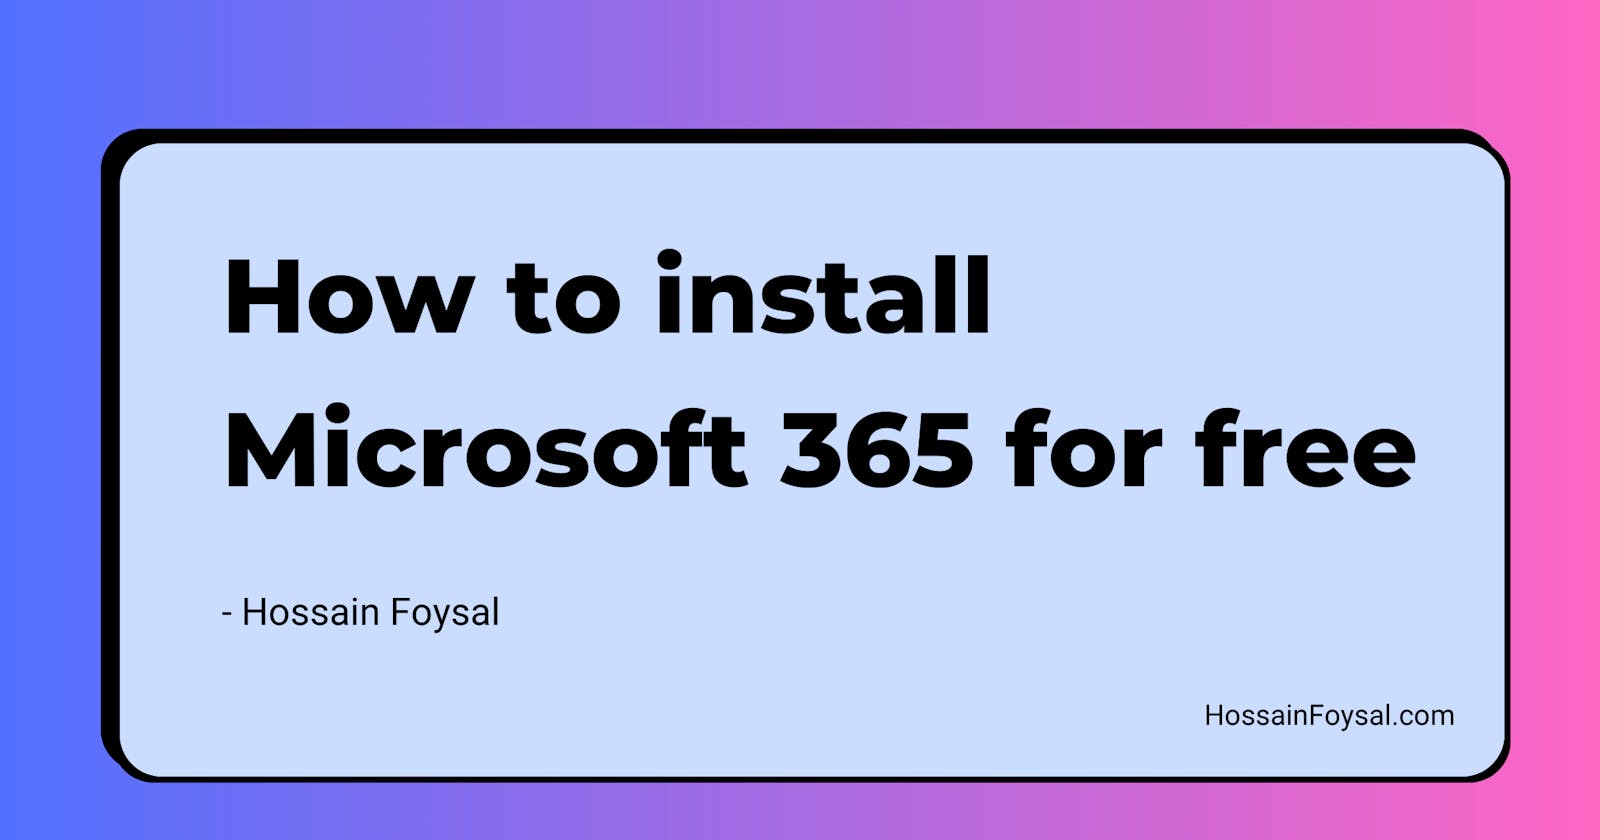 How to install Microsoft 365 for free